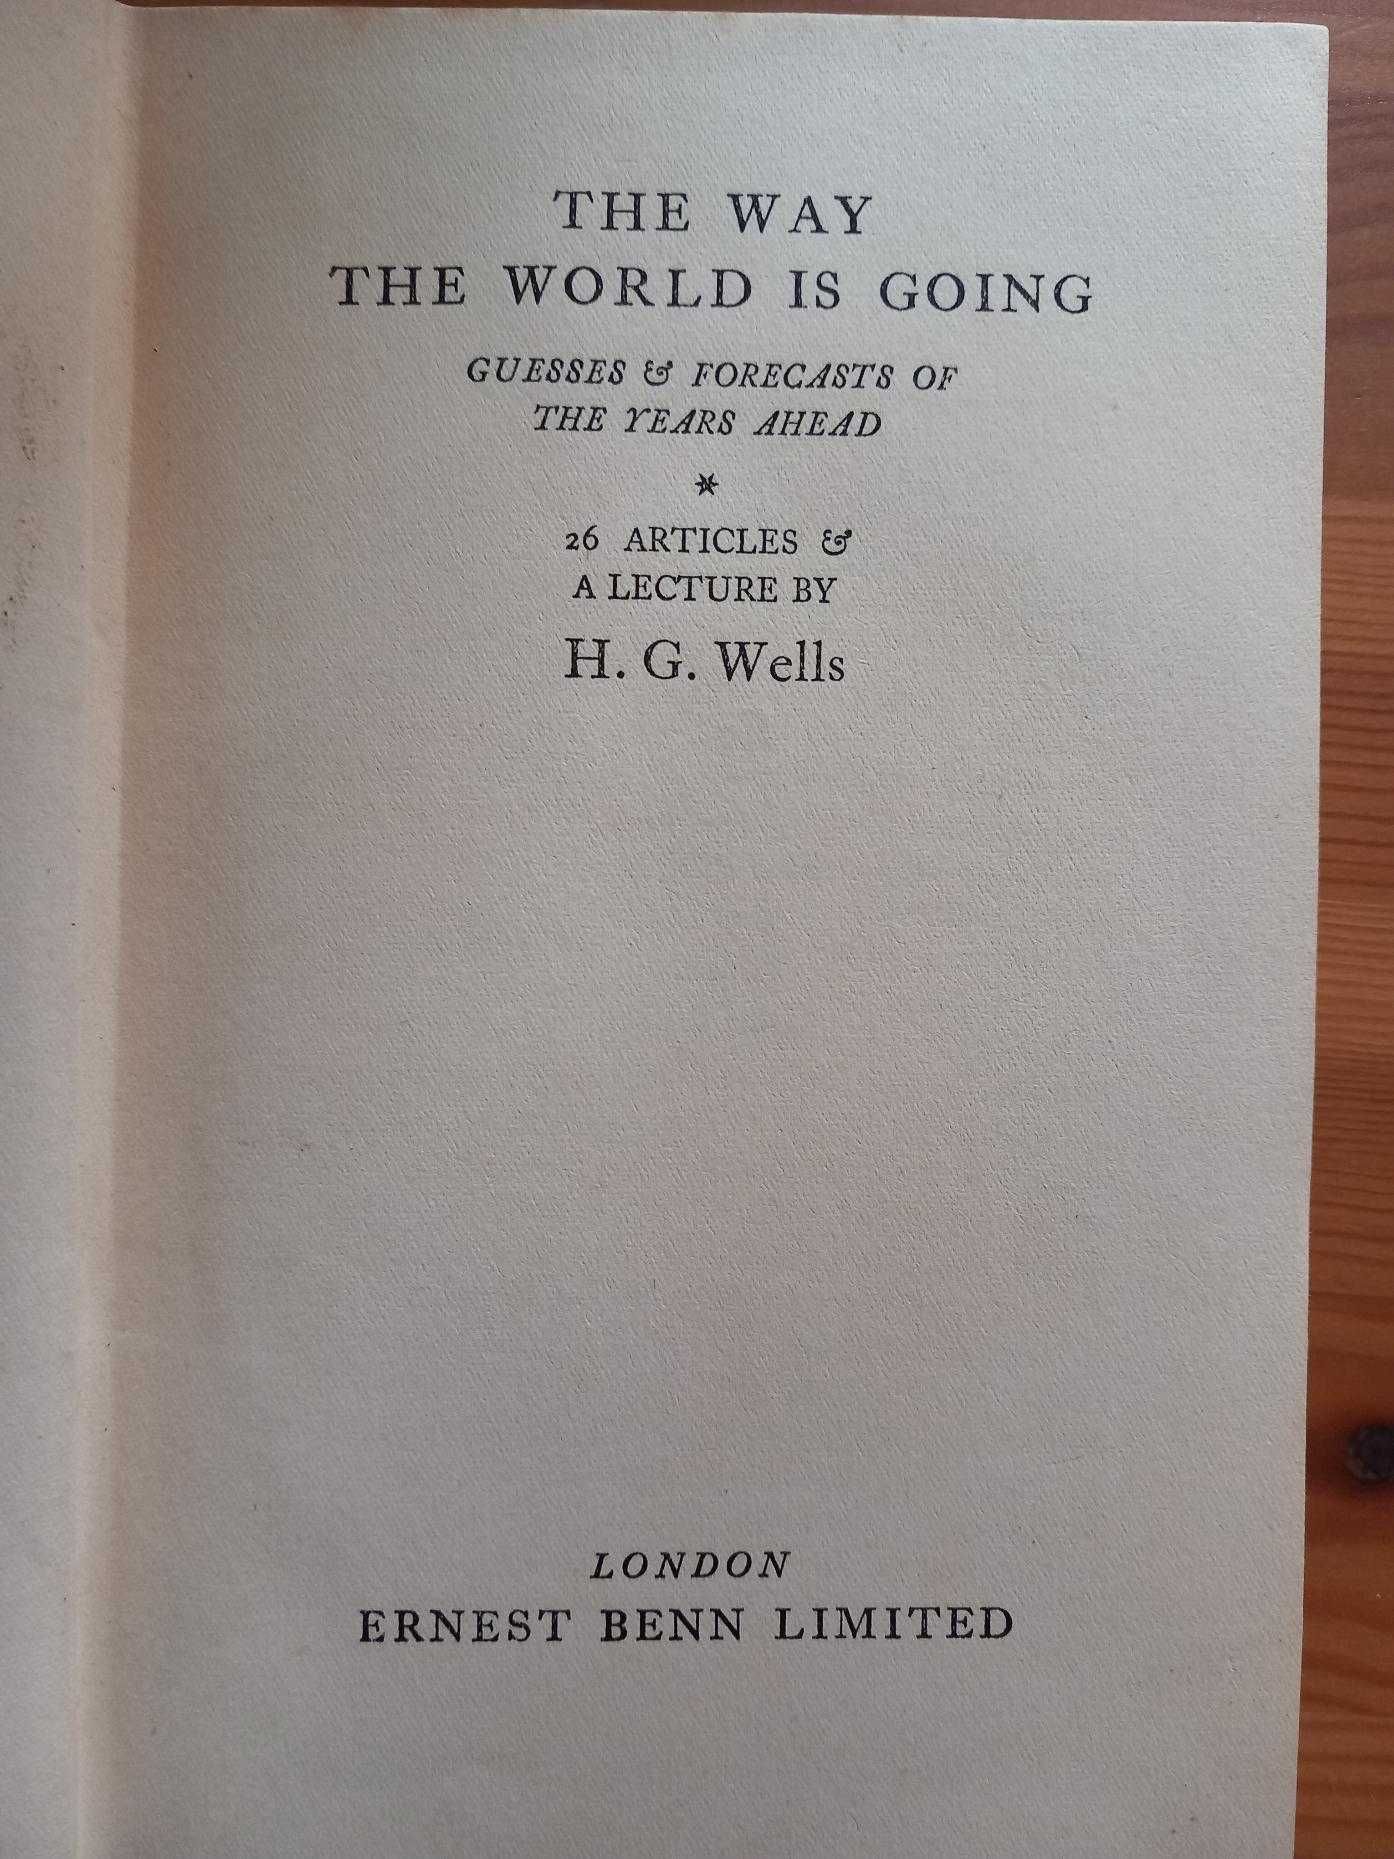 H. G. Wells, The way the world is going